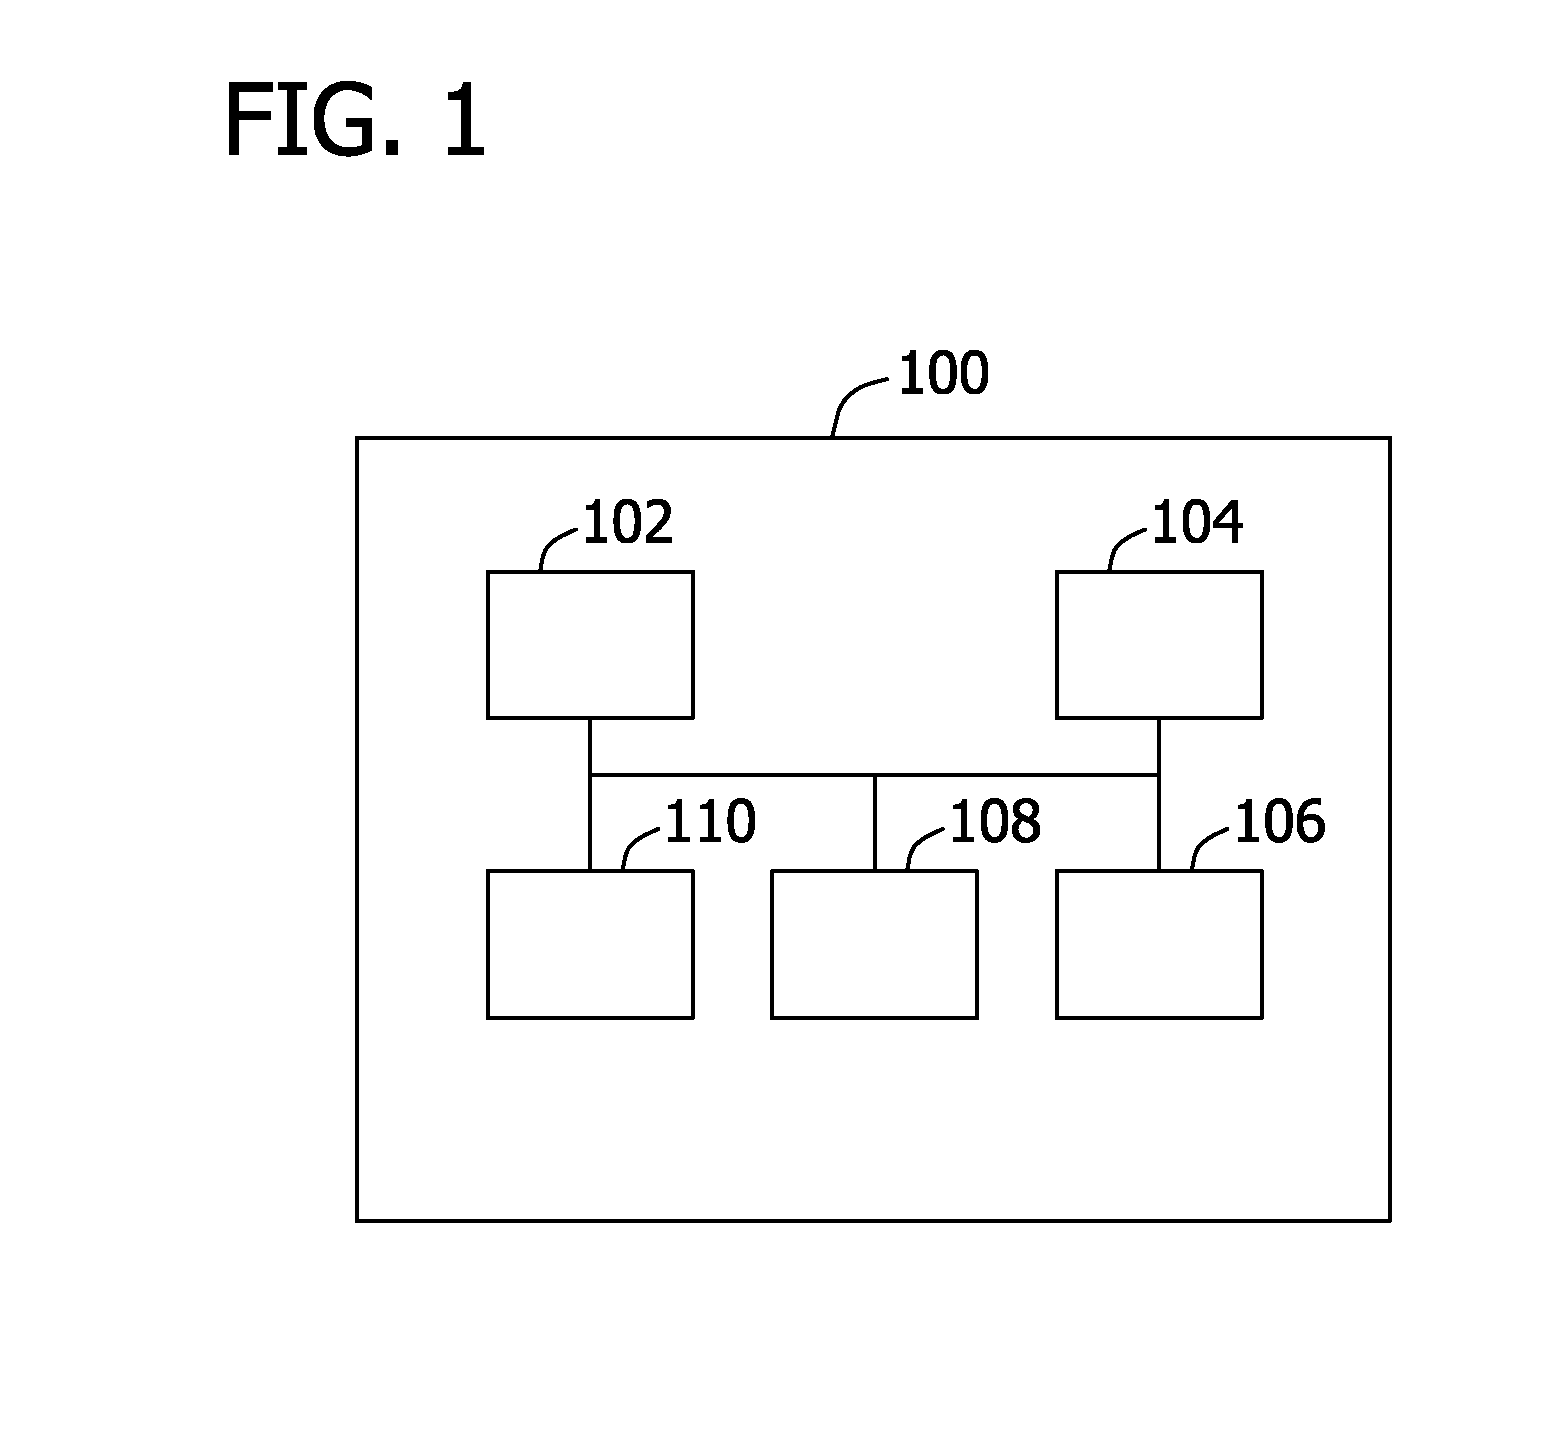 Methods and systems for selecting a workscope for a system